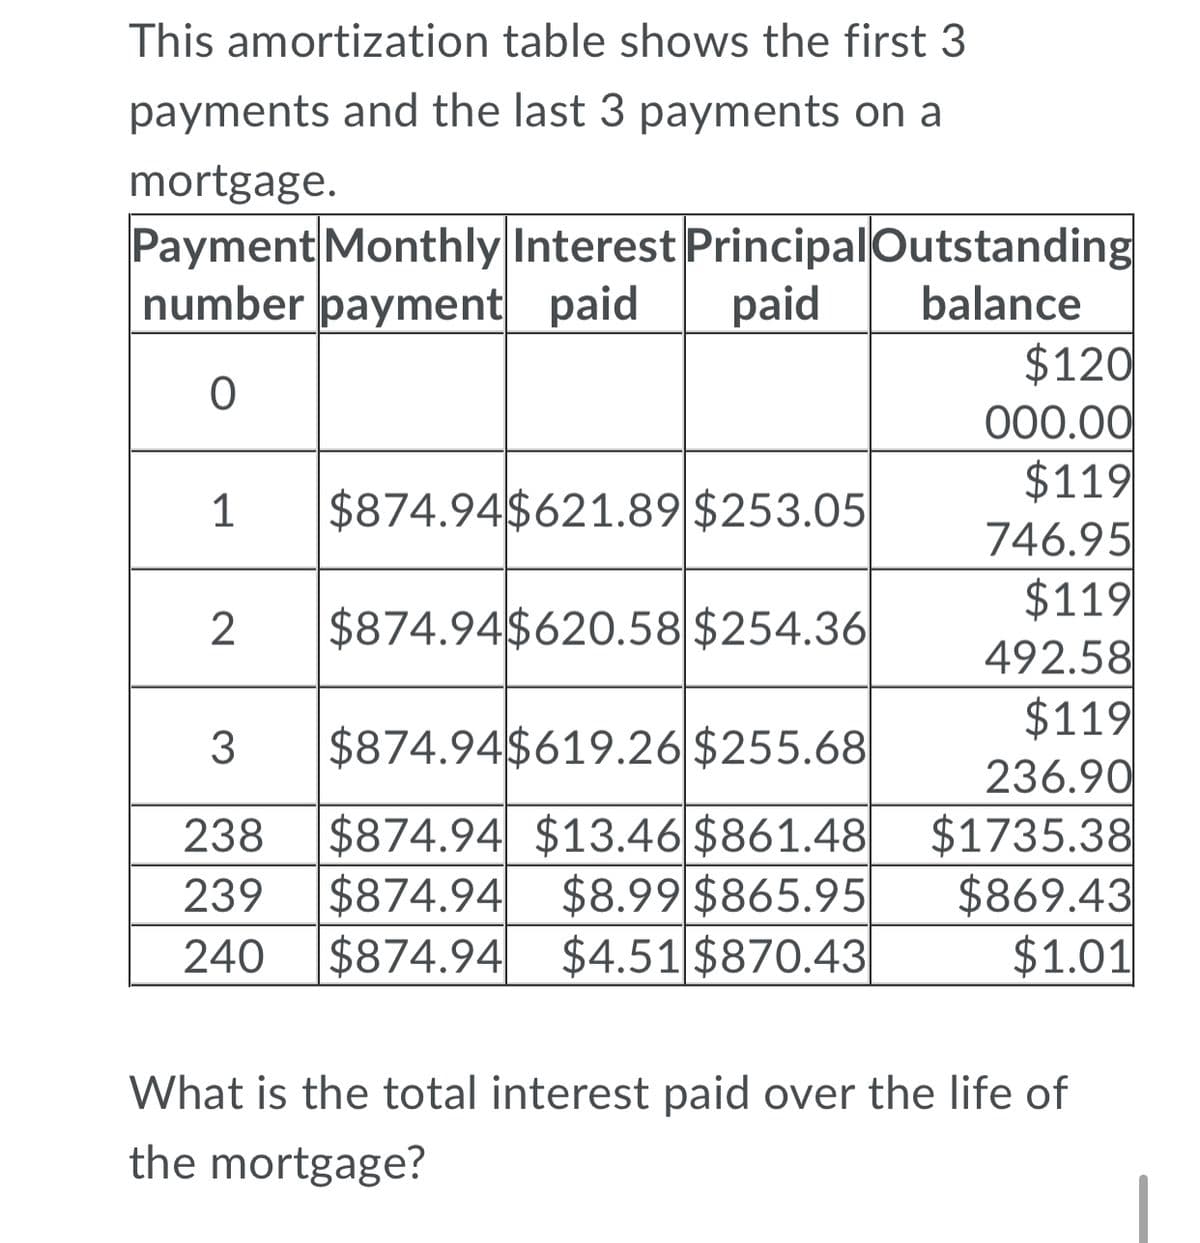 This amortization table shows the first 3
payments and the last 3 payments on a
mortgage.
Payment Monthly Interest PrincipalOutstanding
number payment paid
paid
balance
$120
000.00
$119
746.95
$119
492.58
$119
236.90
$1735.38
$869.43
$1.01
1
$874.94$621.89 $253.05
2
$874.94$620.58 $254.36
3
$874.94$619.26 $255.68
$874.94 $13.46 $861.48
$874.94
$874.94
238
$8.99 $865.95
$4.51 $870.43
239
240
What is the total interest paid over the life of
the mortgage?
